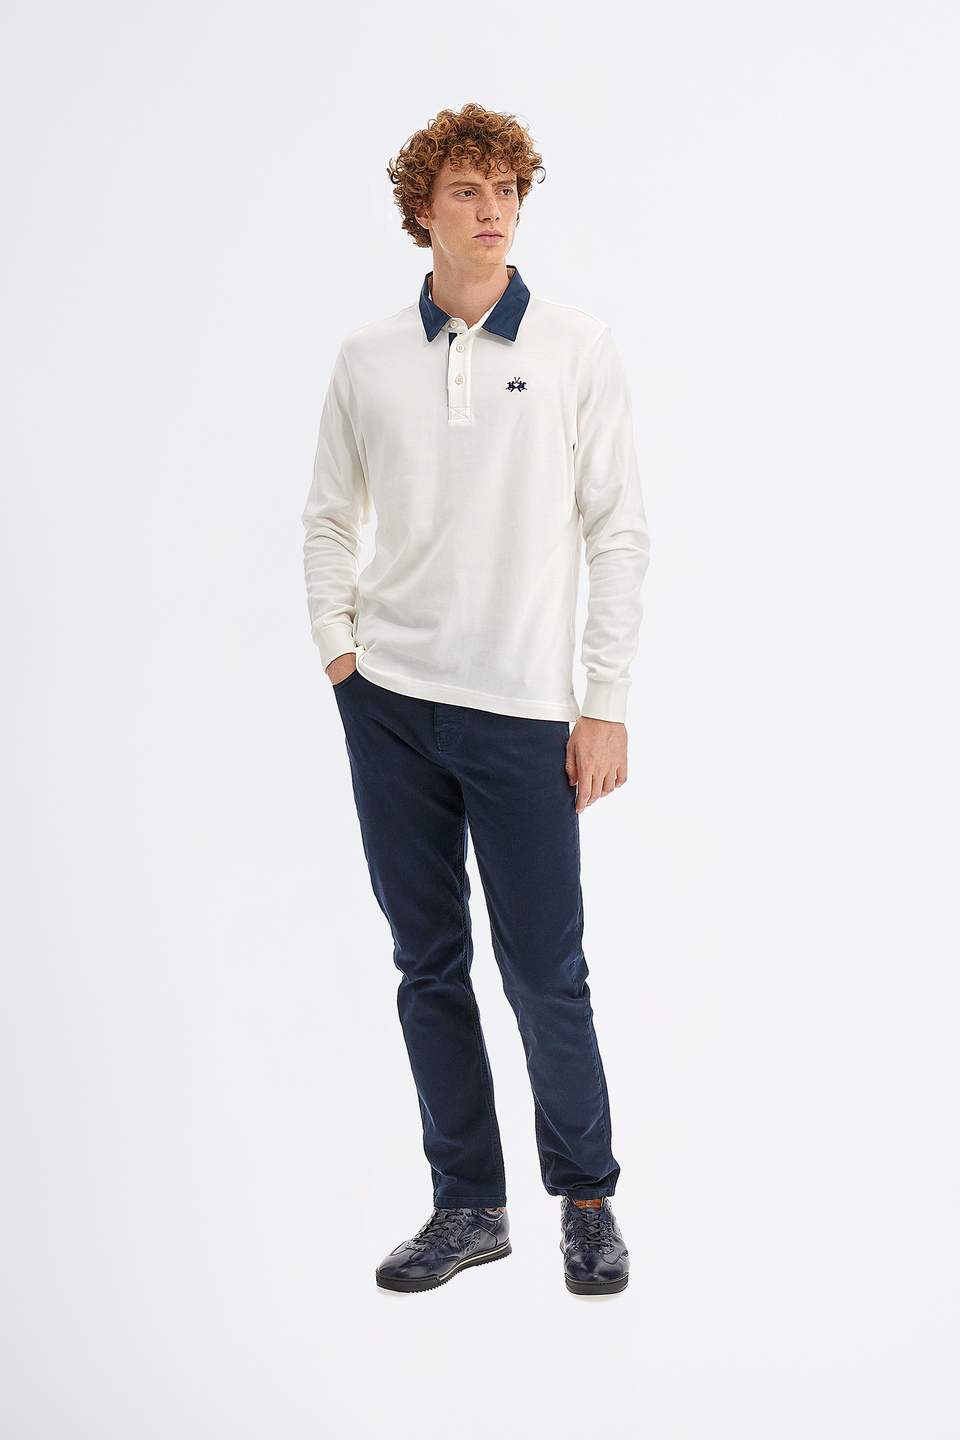 Men’s polo shirt with long sleeves in regular fit jersey cotton | La Martina - Official Online Shop